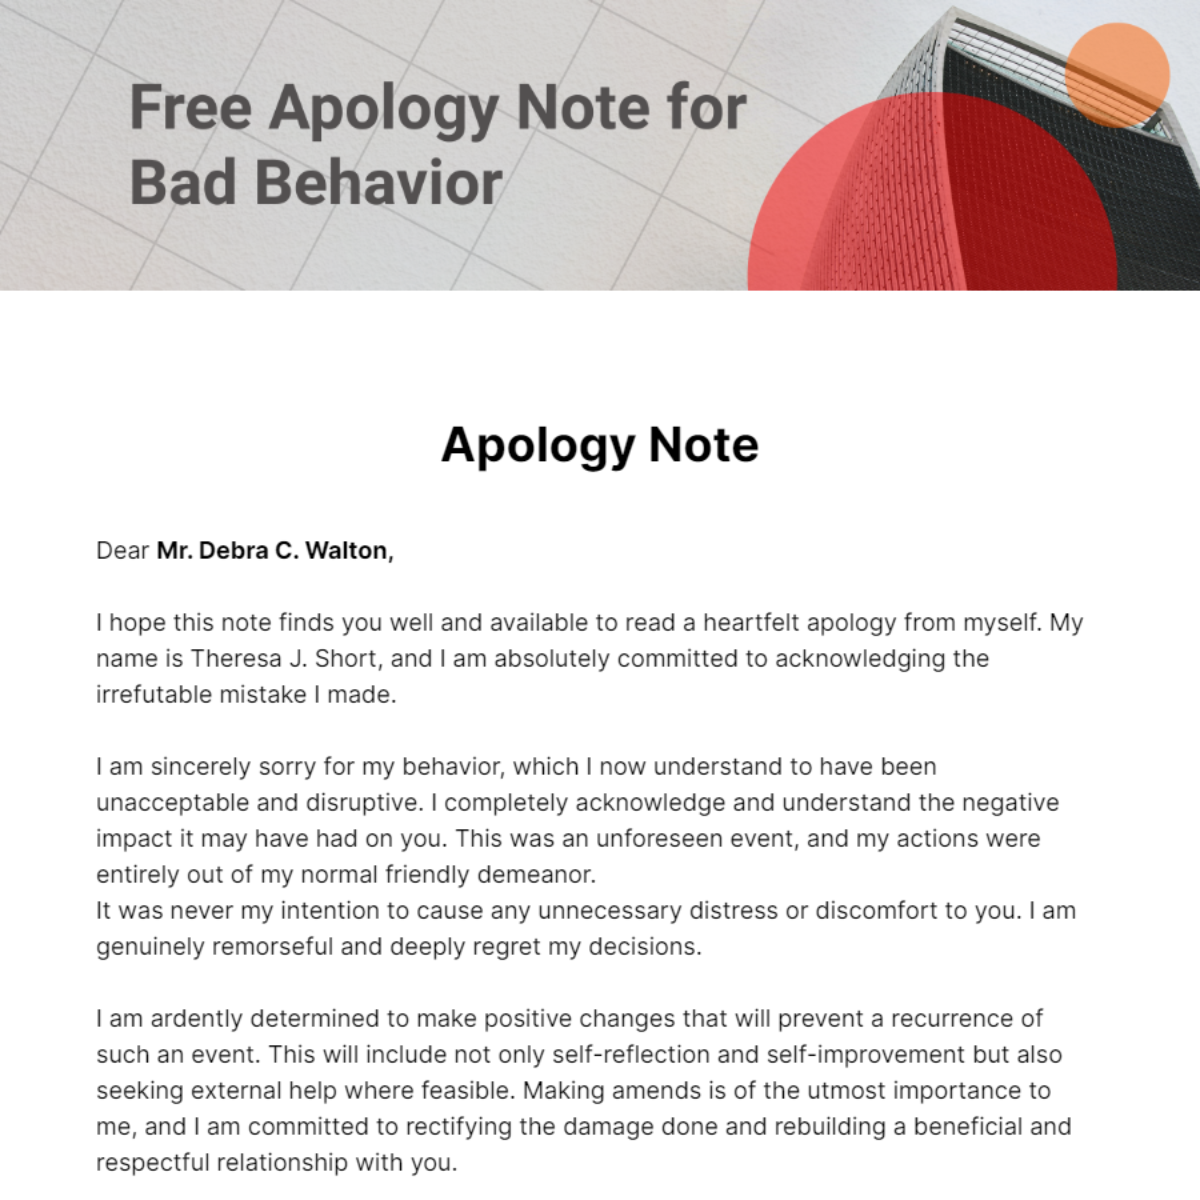 Free Apology Note for Bad Behavior Template